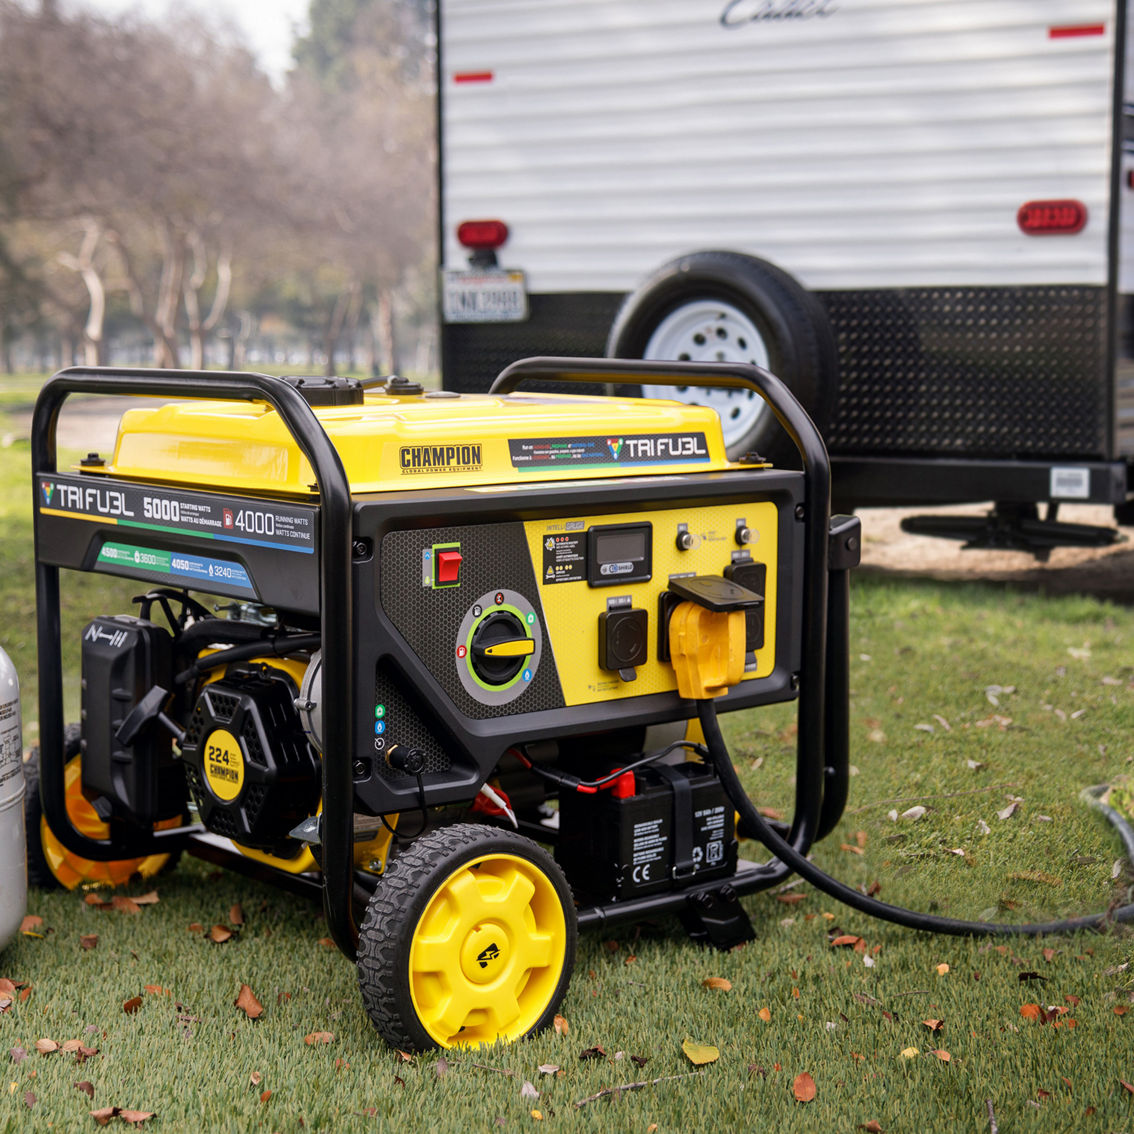 Champion 4000-Watt Tri Fuel Portable Natural Gas Generator with Electric Start - Image 5 of 10